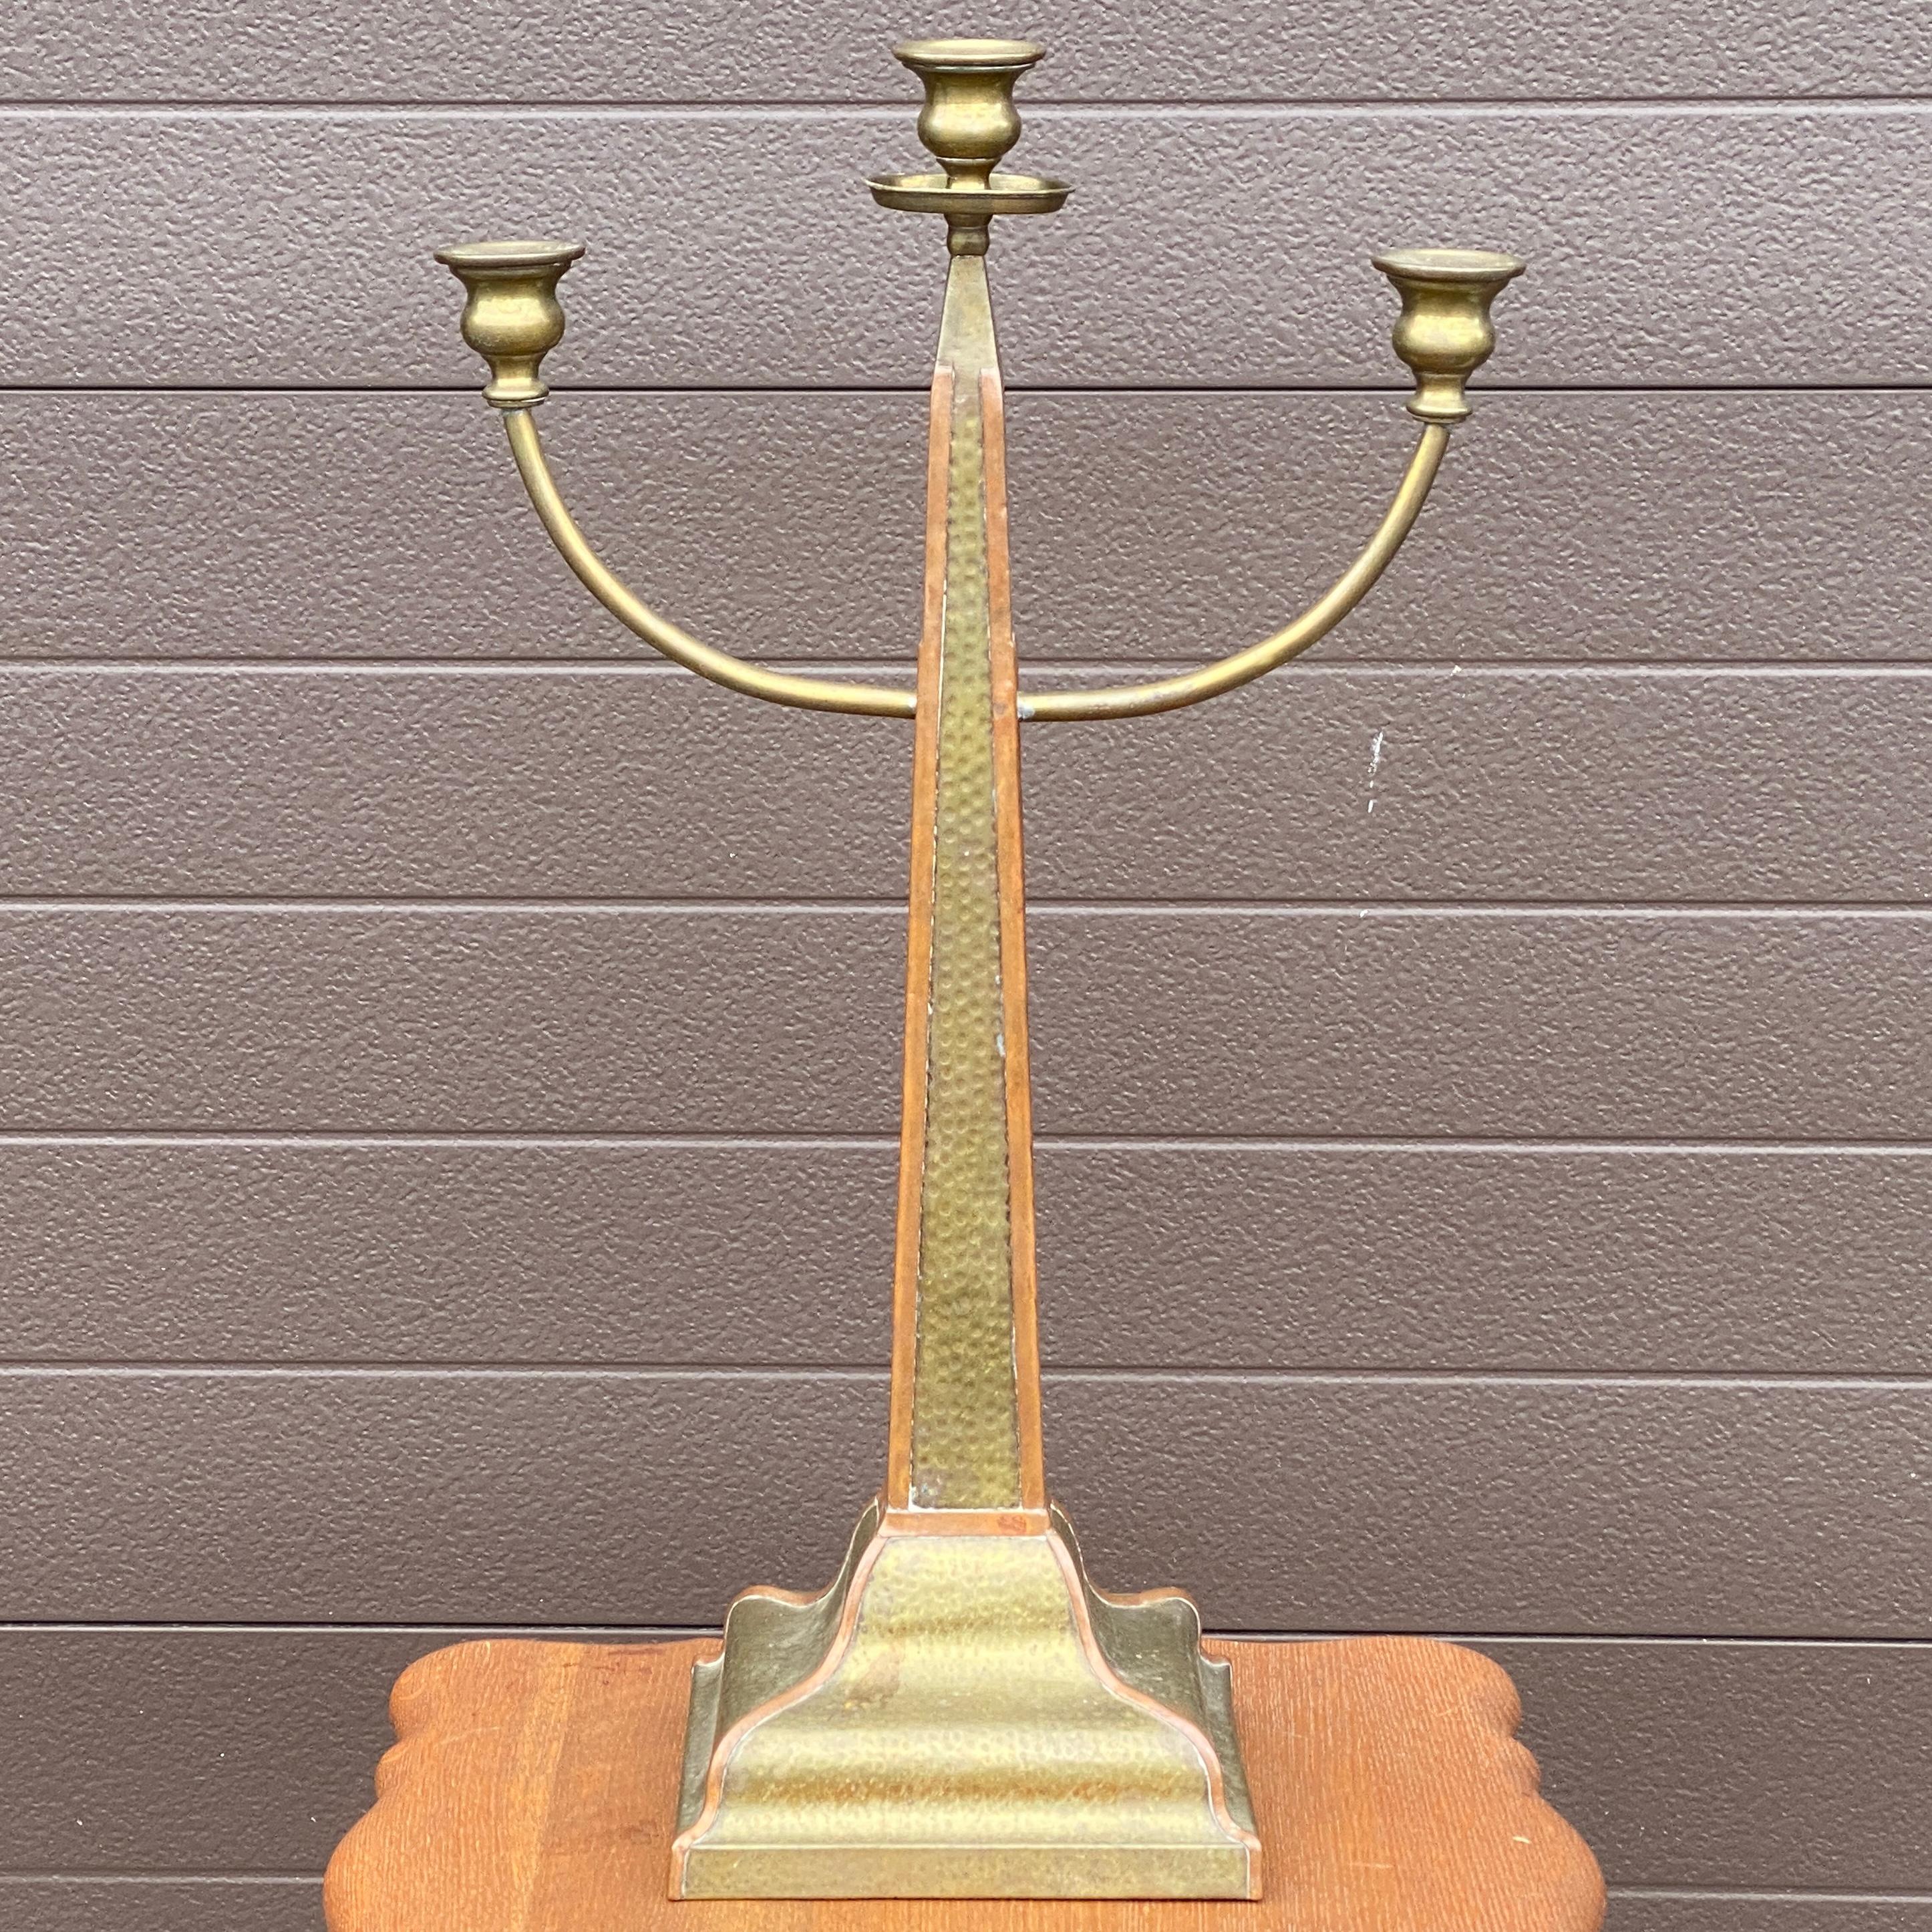 A unique obelisk shaped candelabra in hammered brass and trimmed in copper. Unmarked
Base measures roughly 7.25” x 6.25”